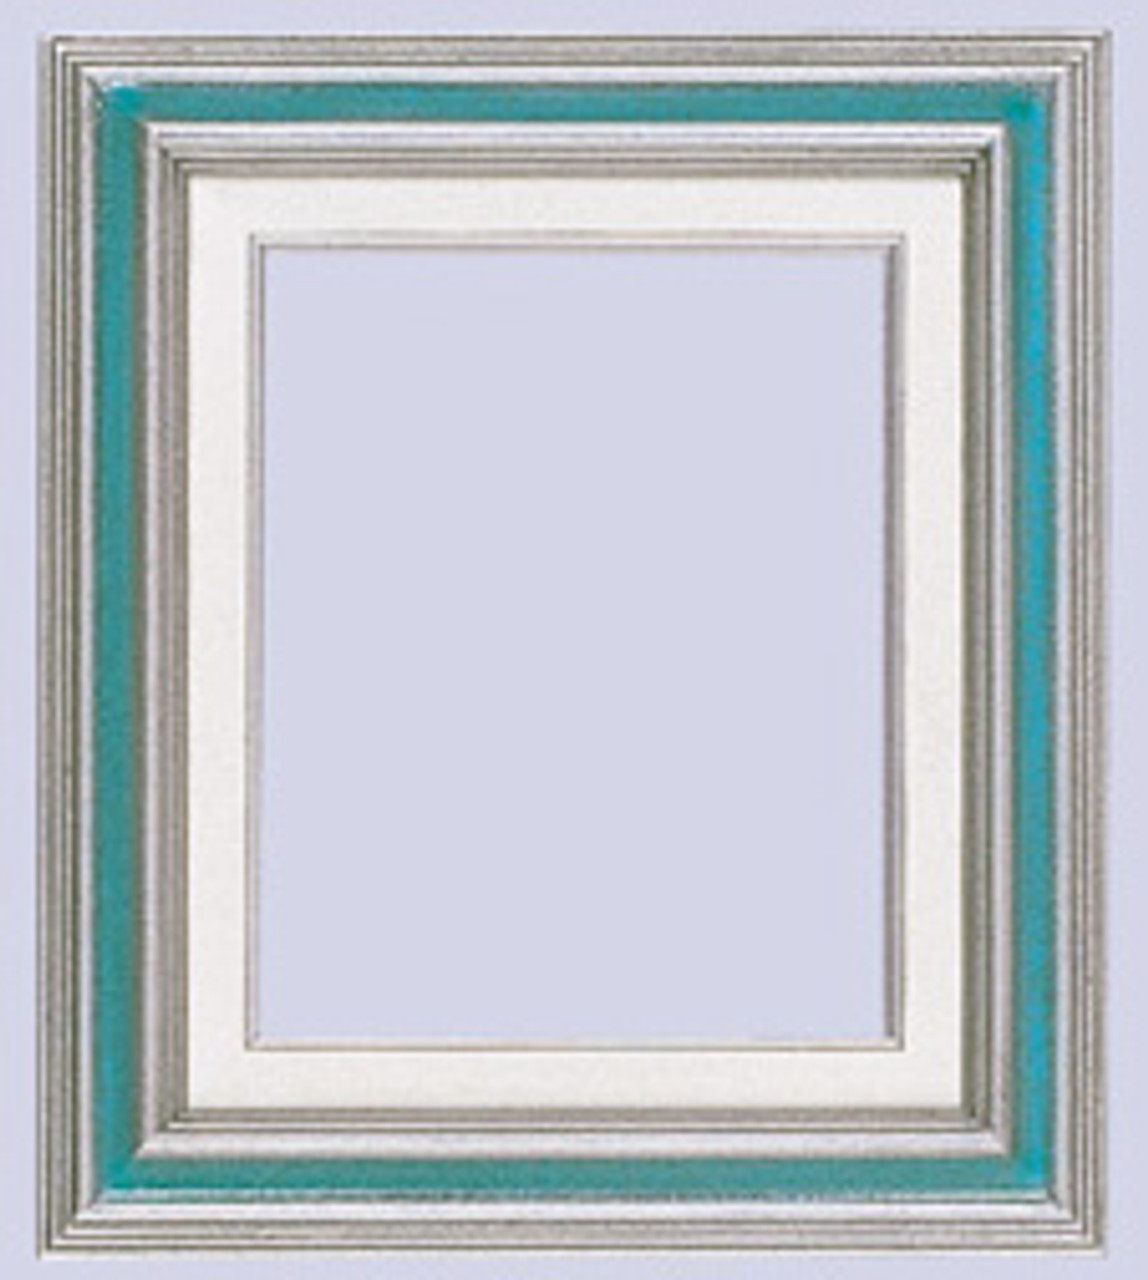  3 Inch Econo Wood Frames With Linen Liners: 4X10